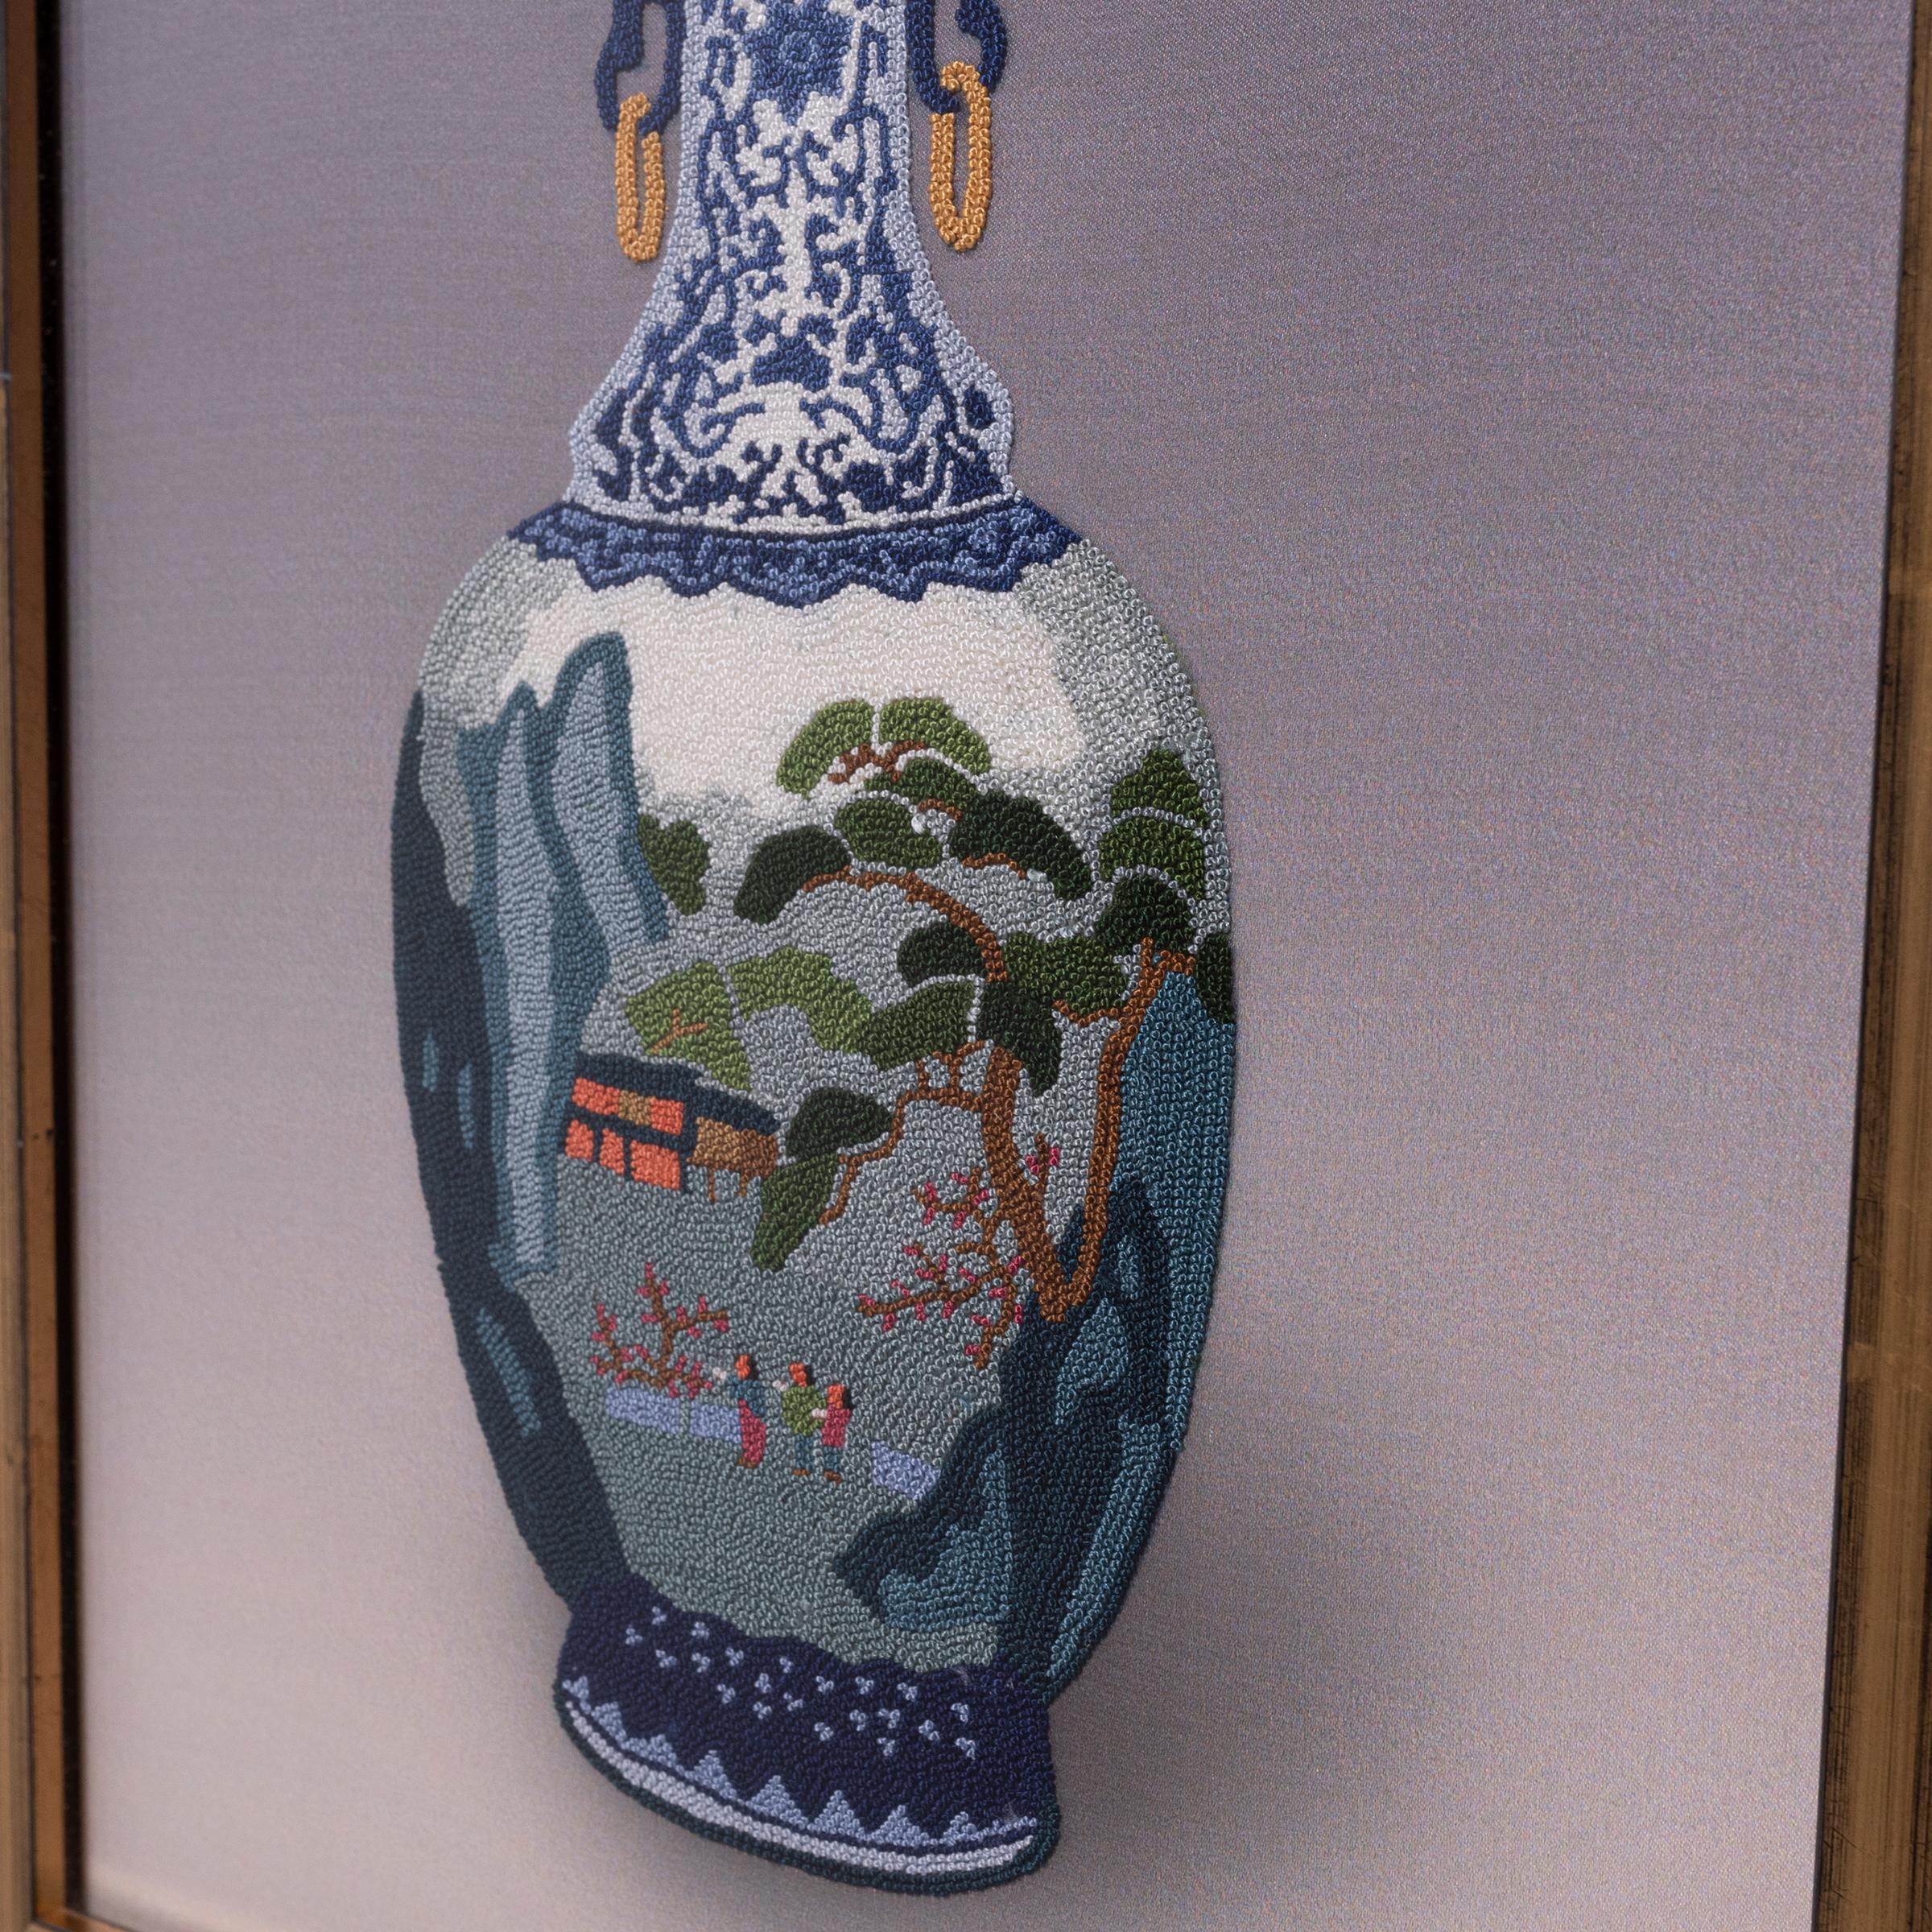 A wonderful example of Chinese embroidery, this framed silk textile uses the infamous forbidden stitch to depict a fine blue-and-white porcelain vase. Also known as the 